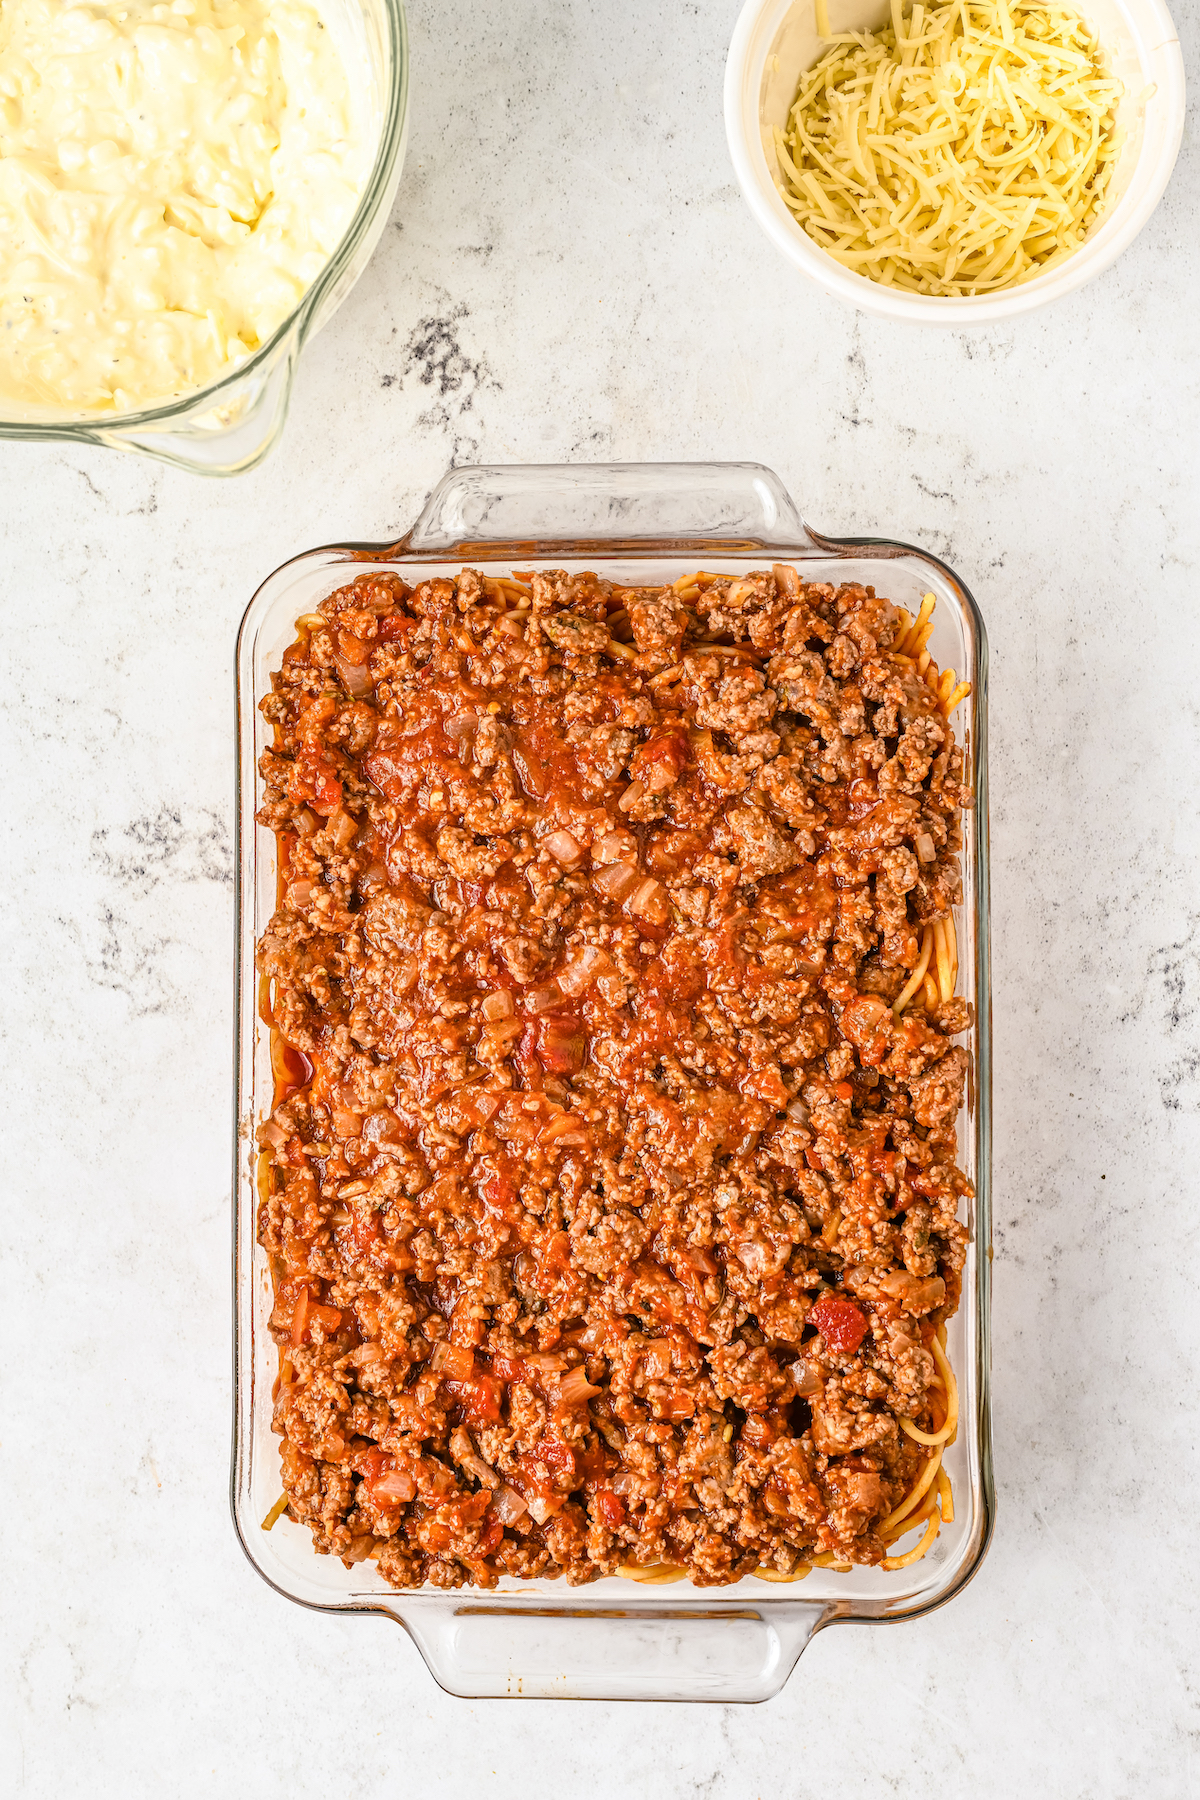 Meat sauce in a baking dish.